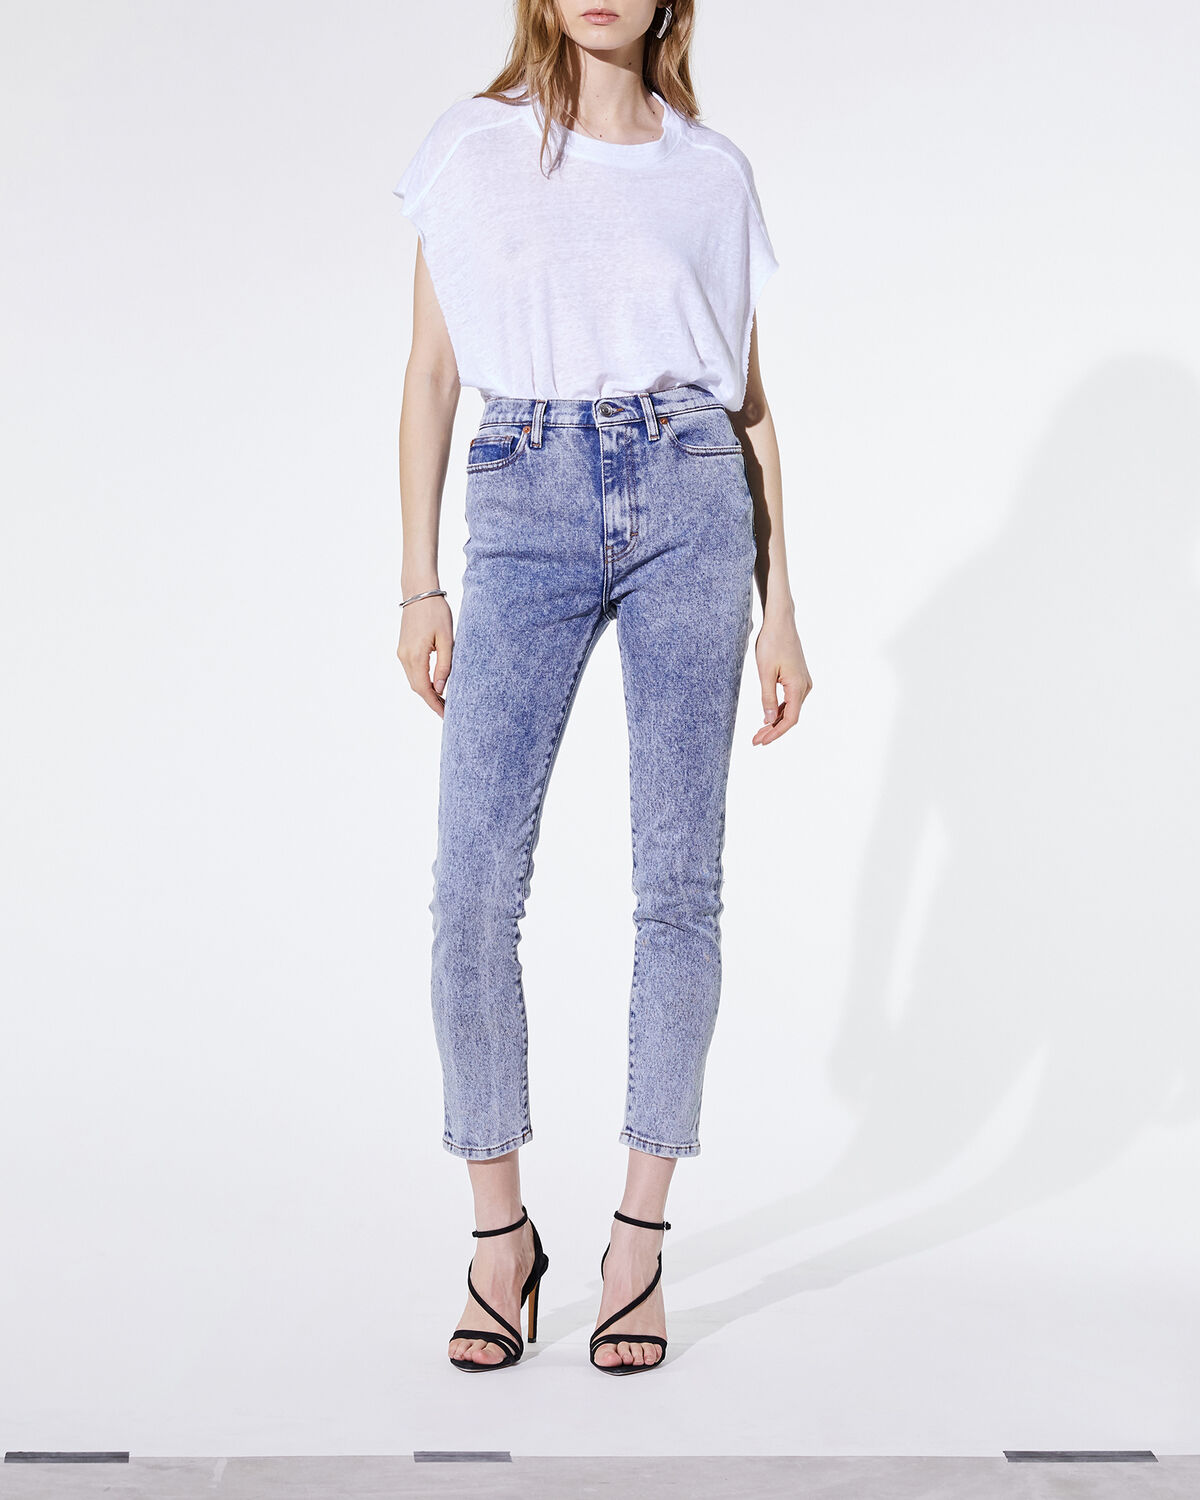 Photo of IRO Paris Oilie Jeans Light Denim - These 7/8 Skinny Pants Are A Must-have In Any Wardrobe. Their Plus? Their Faded Effect That Will Brighten Up Your Outfits. Wear Them With A Pair Of Pumps Or A Pair Of Boots For A Resolutely Urban Silhouette. Fall Winter 19